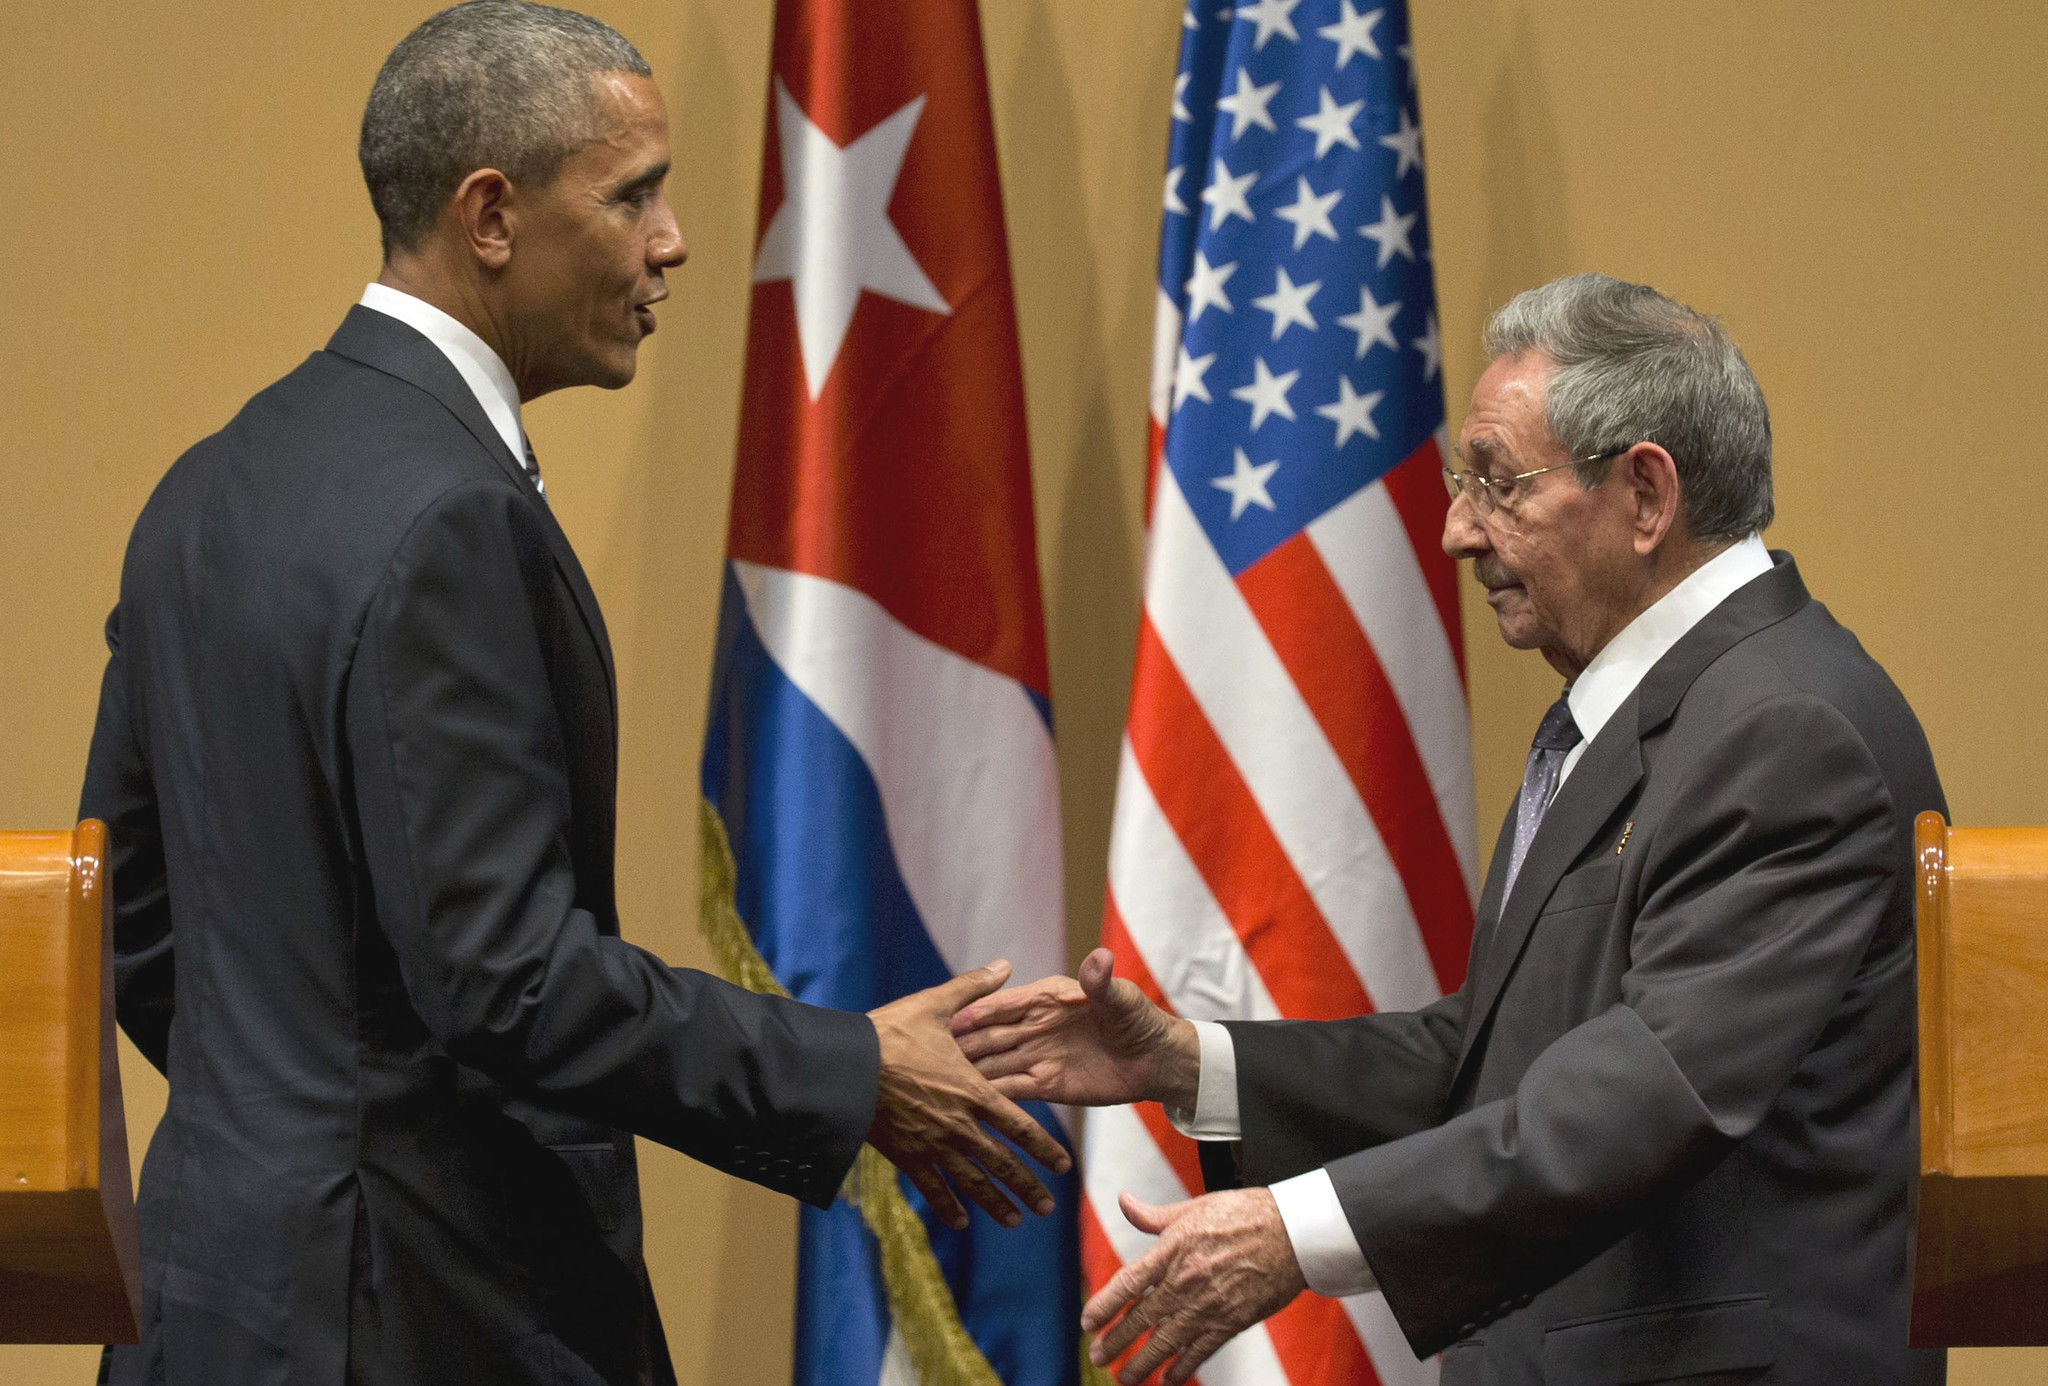 Obama And Castro Side By Side Both Speak Of Human Rights But Sound